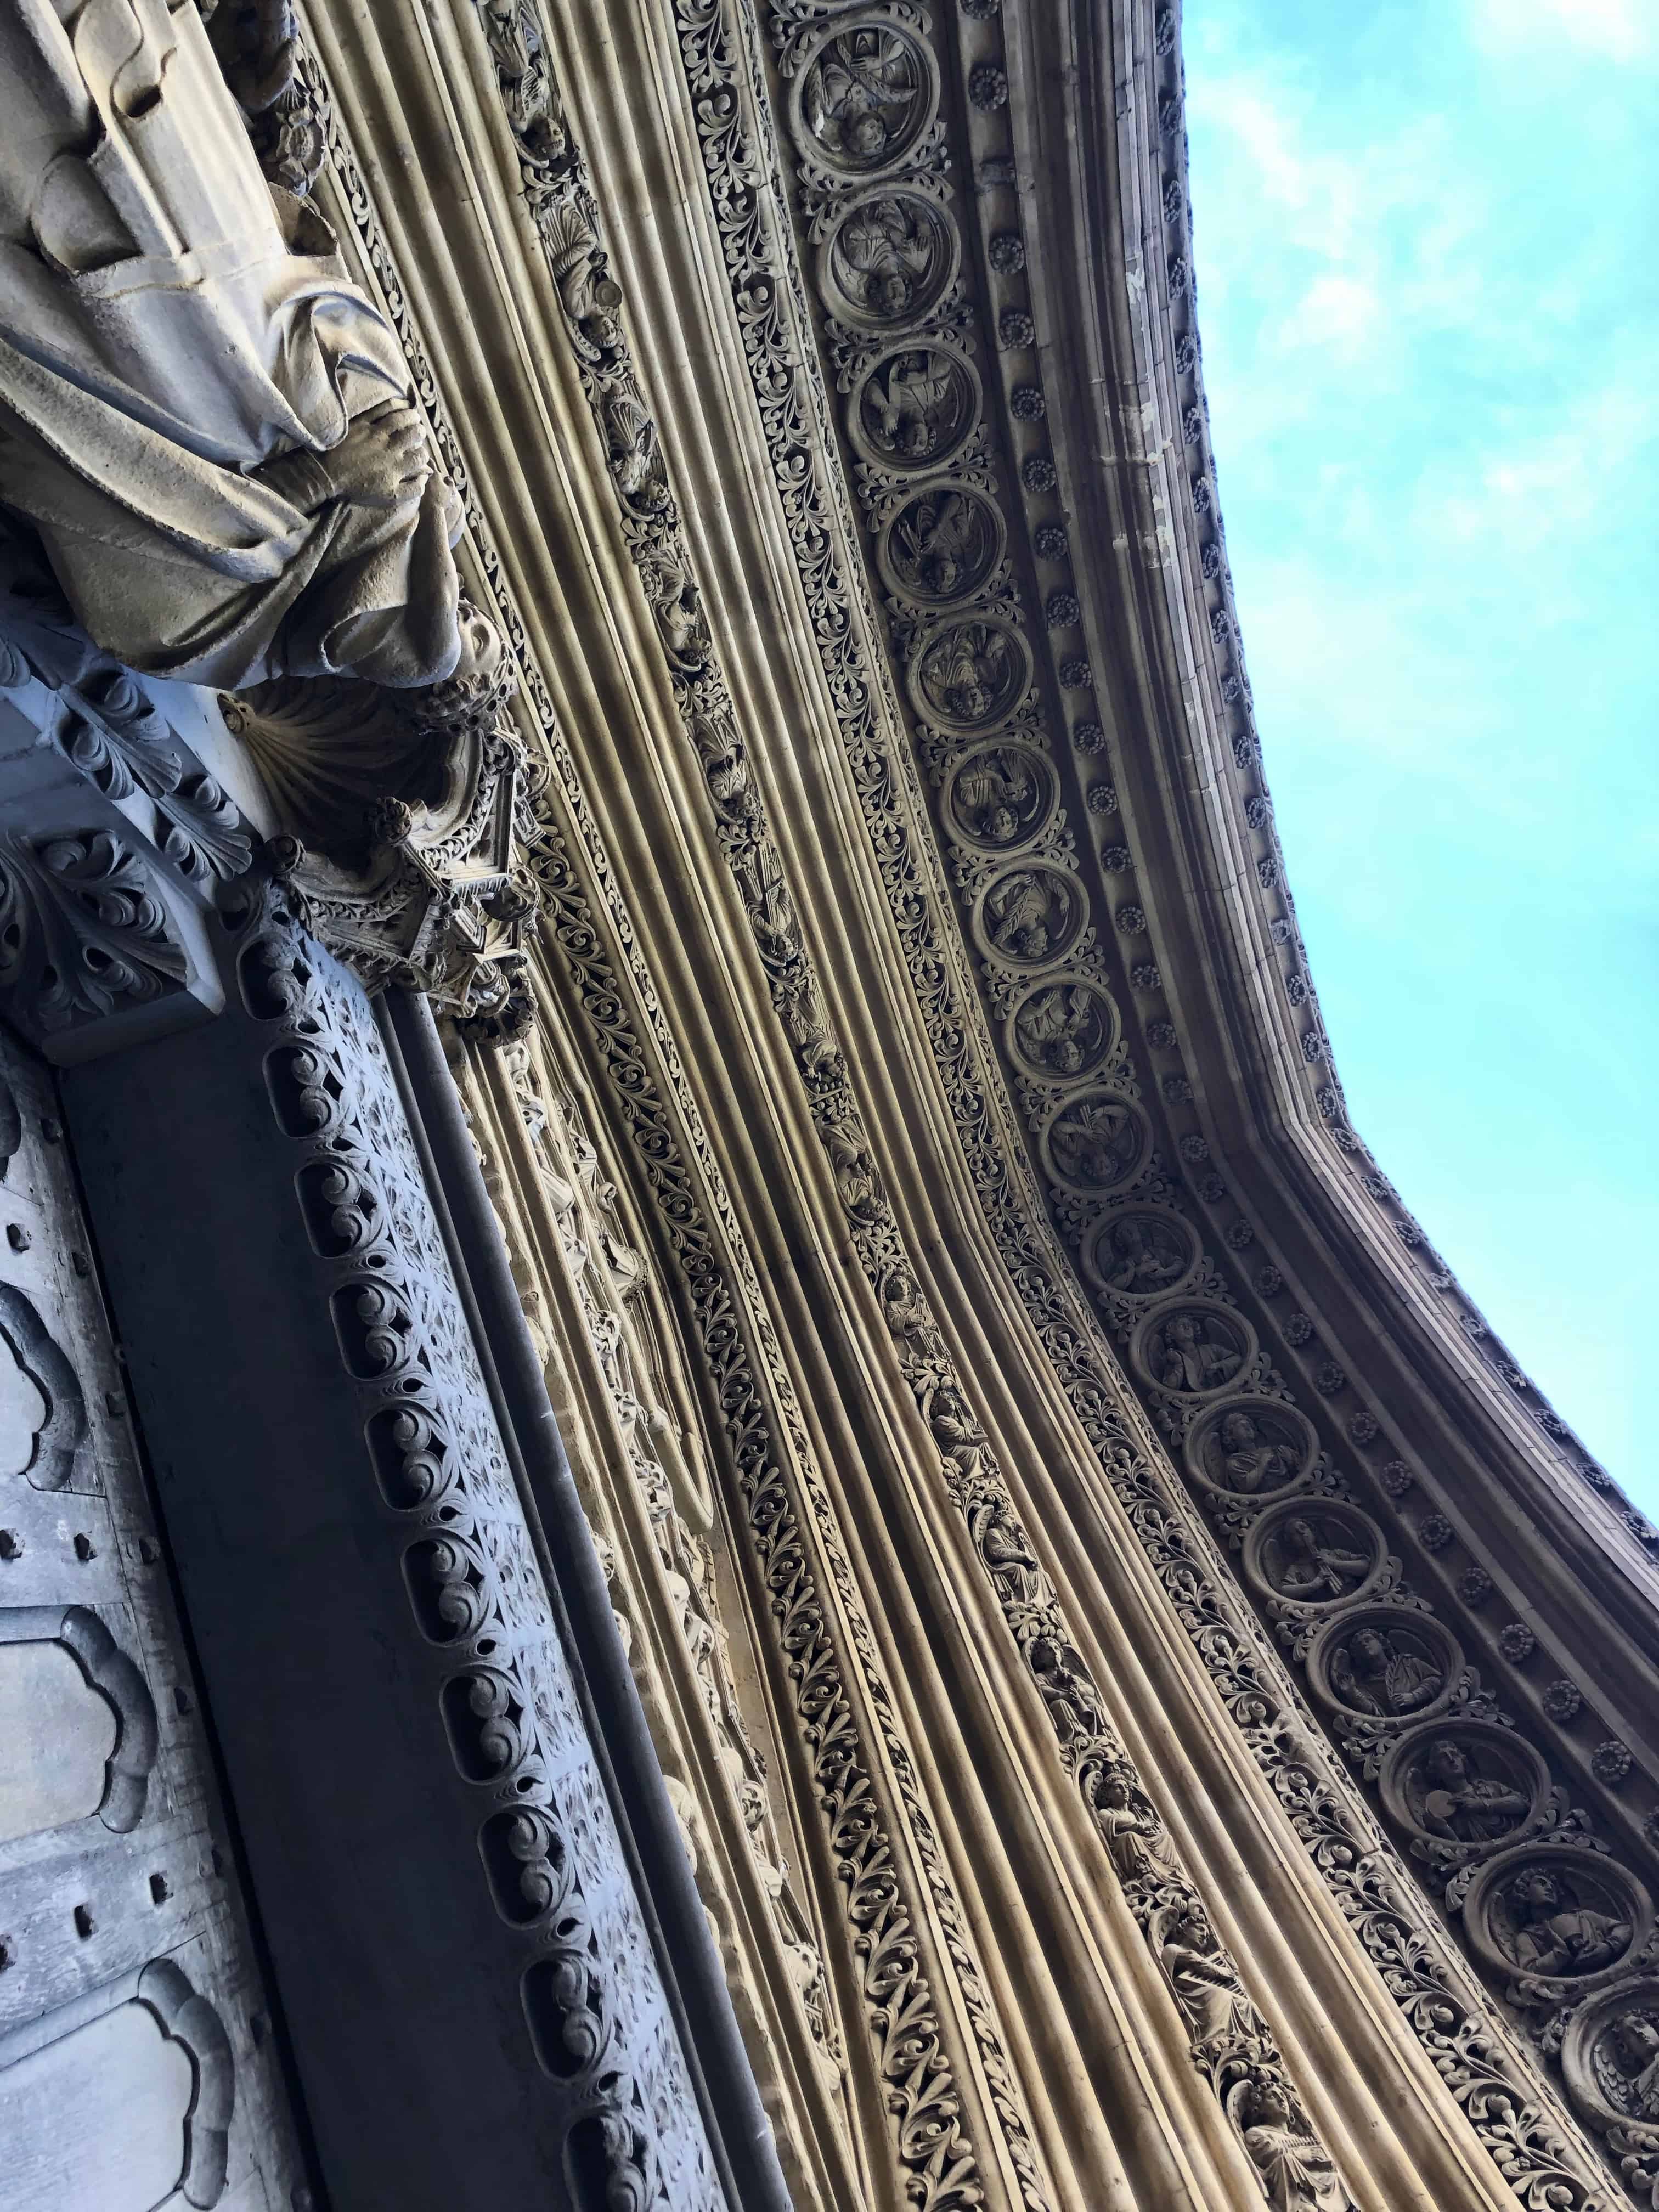 Looking up at the north entrance at Westminster Abbey in London, England